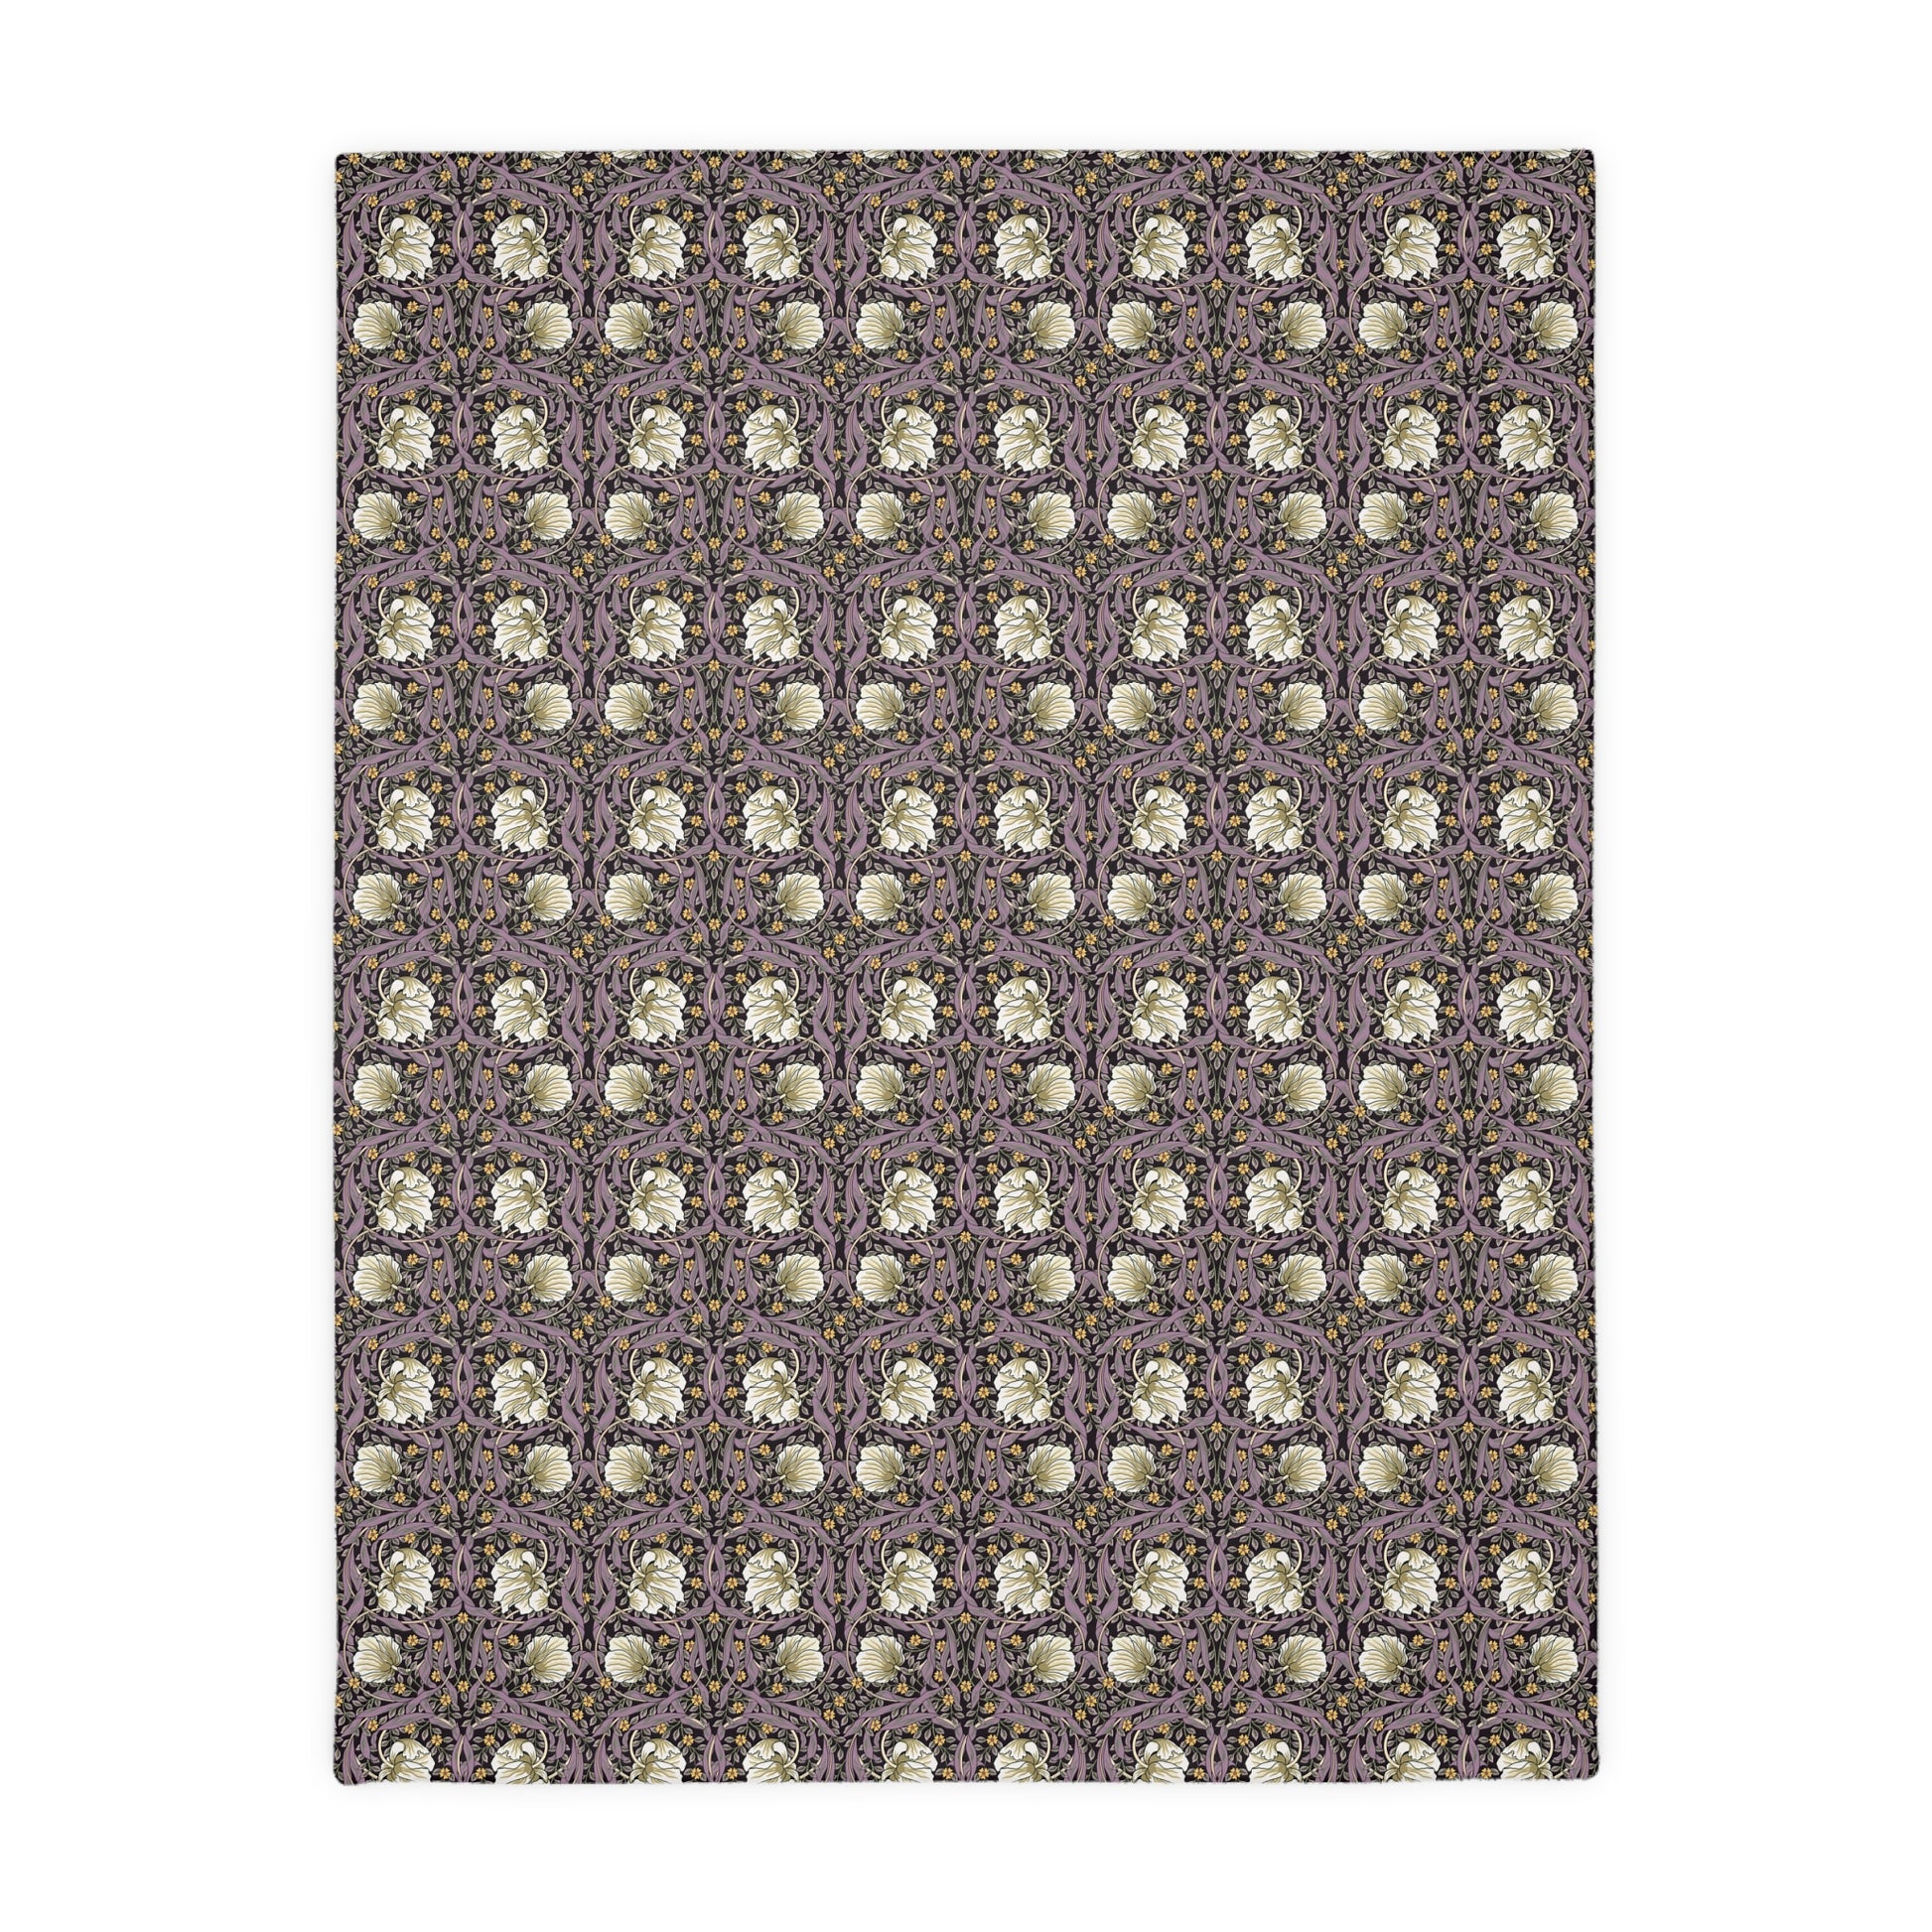 william-morris-co-luxury-velveteen-minky-blanket-two-sided-print-pimpernel-collection-rosewood-lavender-7